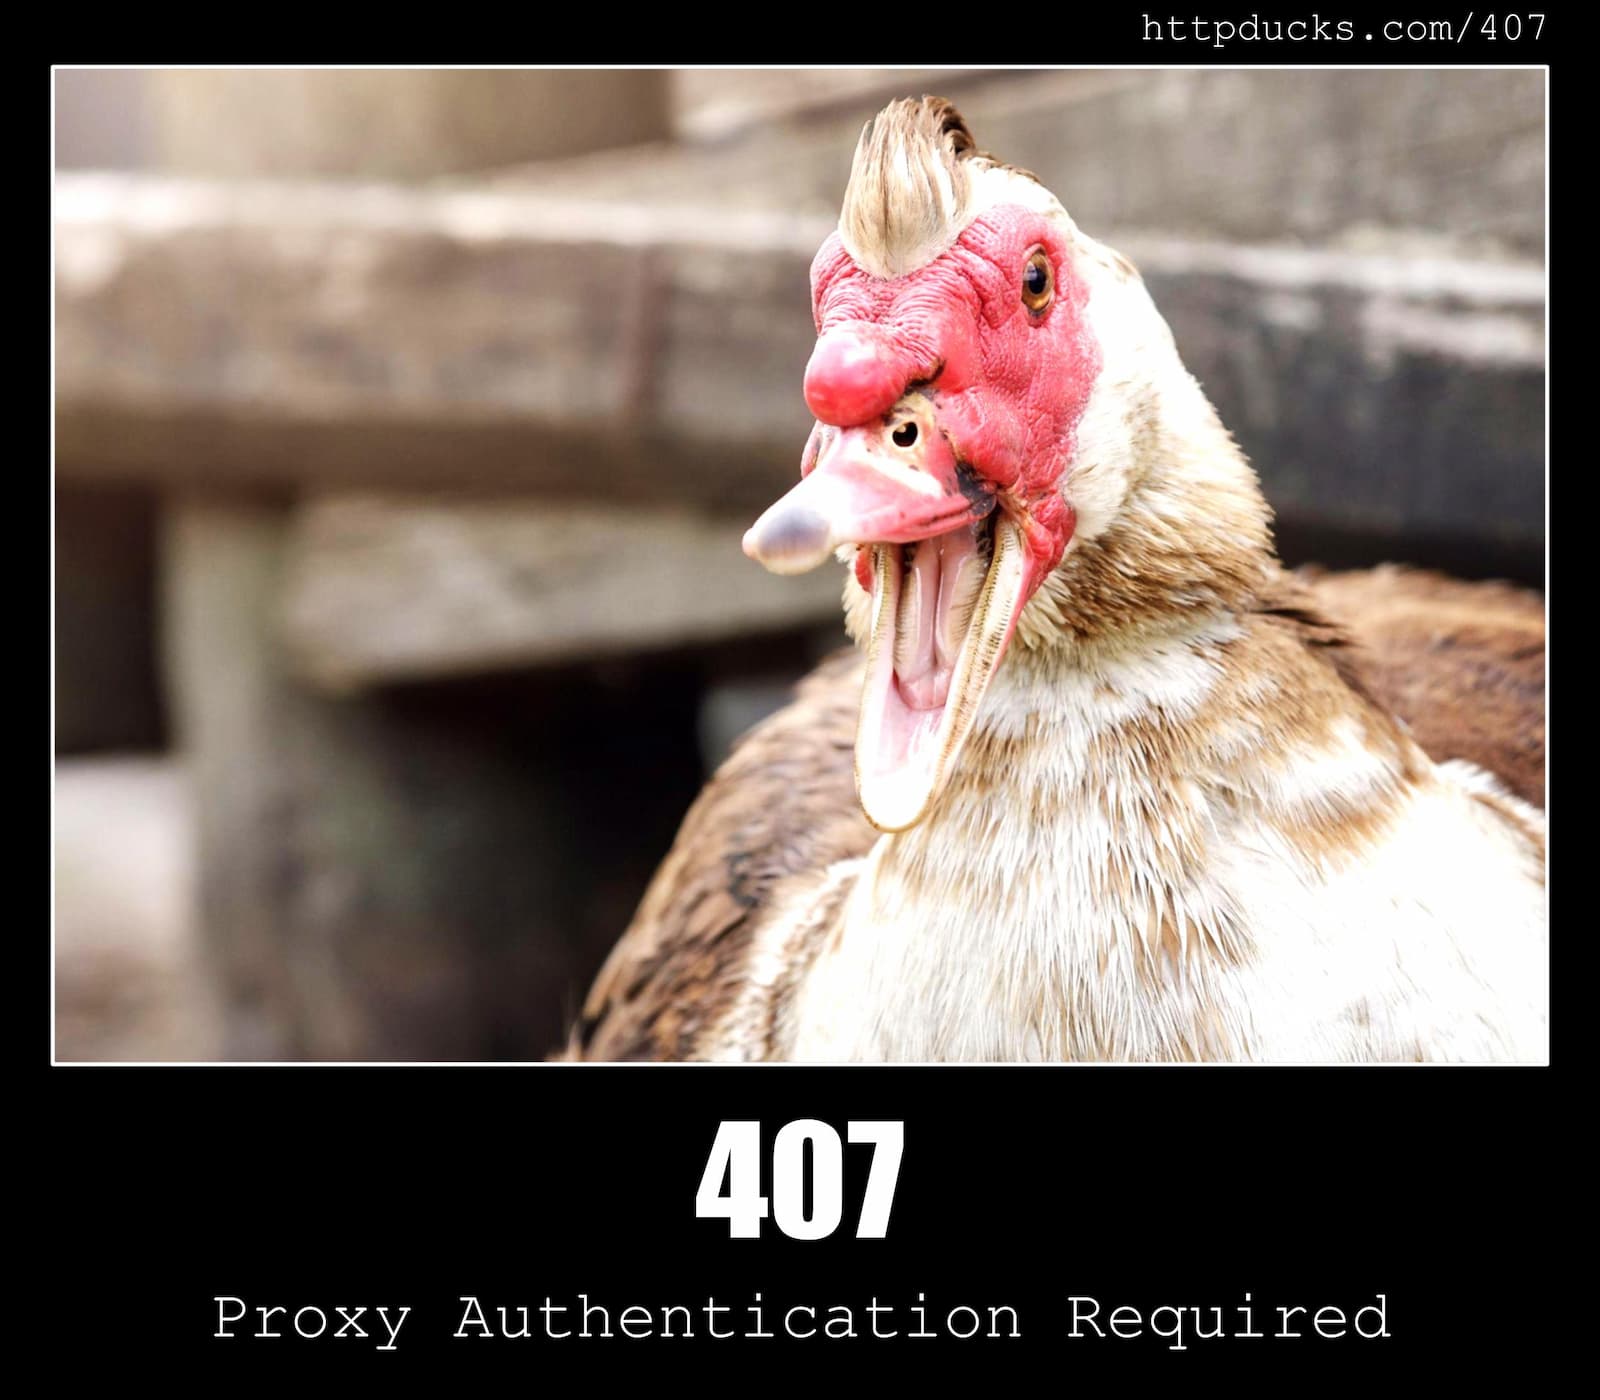 HTTP Status Code 407 Proxy Authentication Required & Ducks